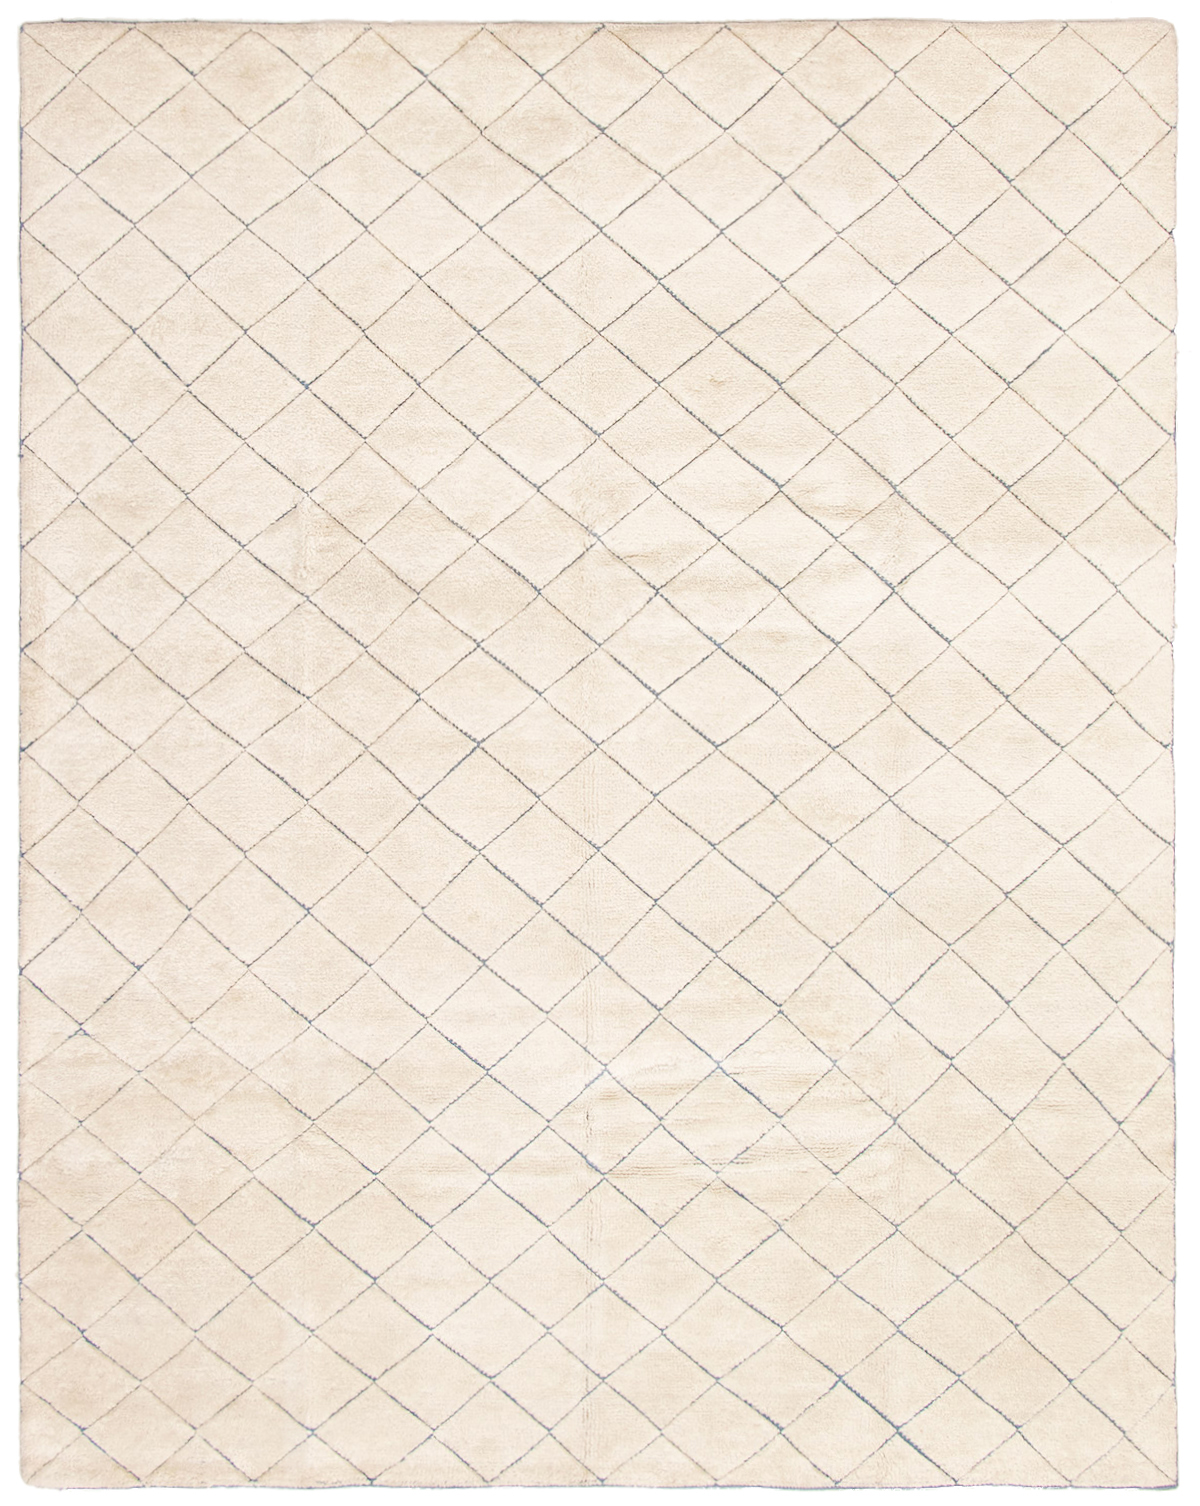 Hand-knotted Arlequin Cream Wool Rug 7'10" x 10'0" Size: 7'10" x 10'0"  